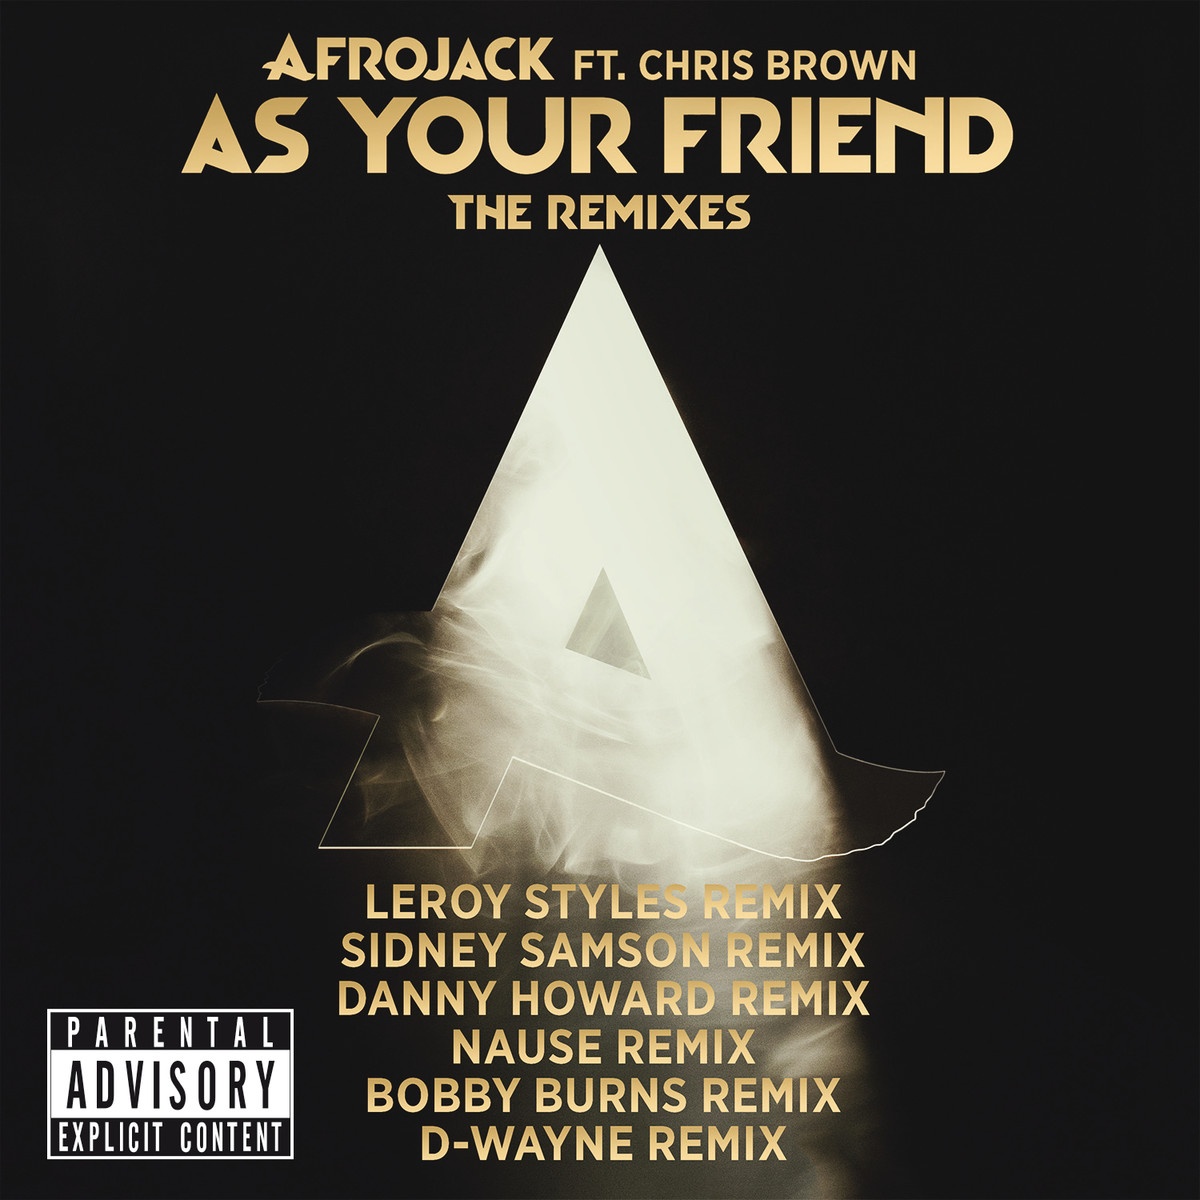 As Your Friend - Bobby Burns Remix